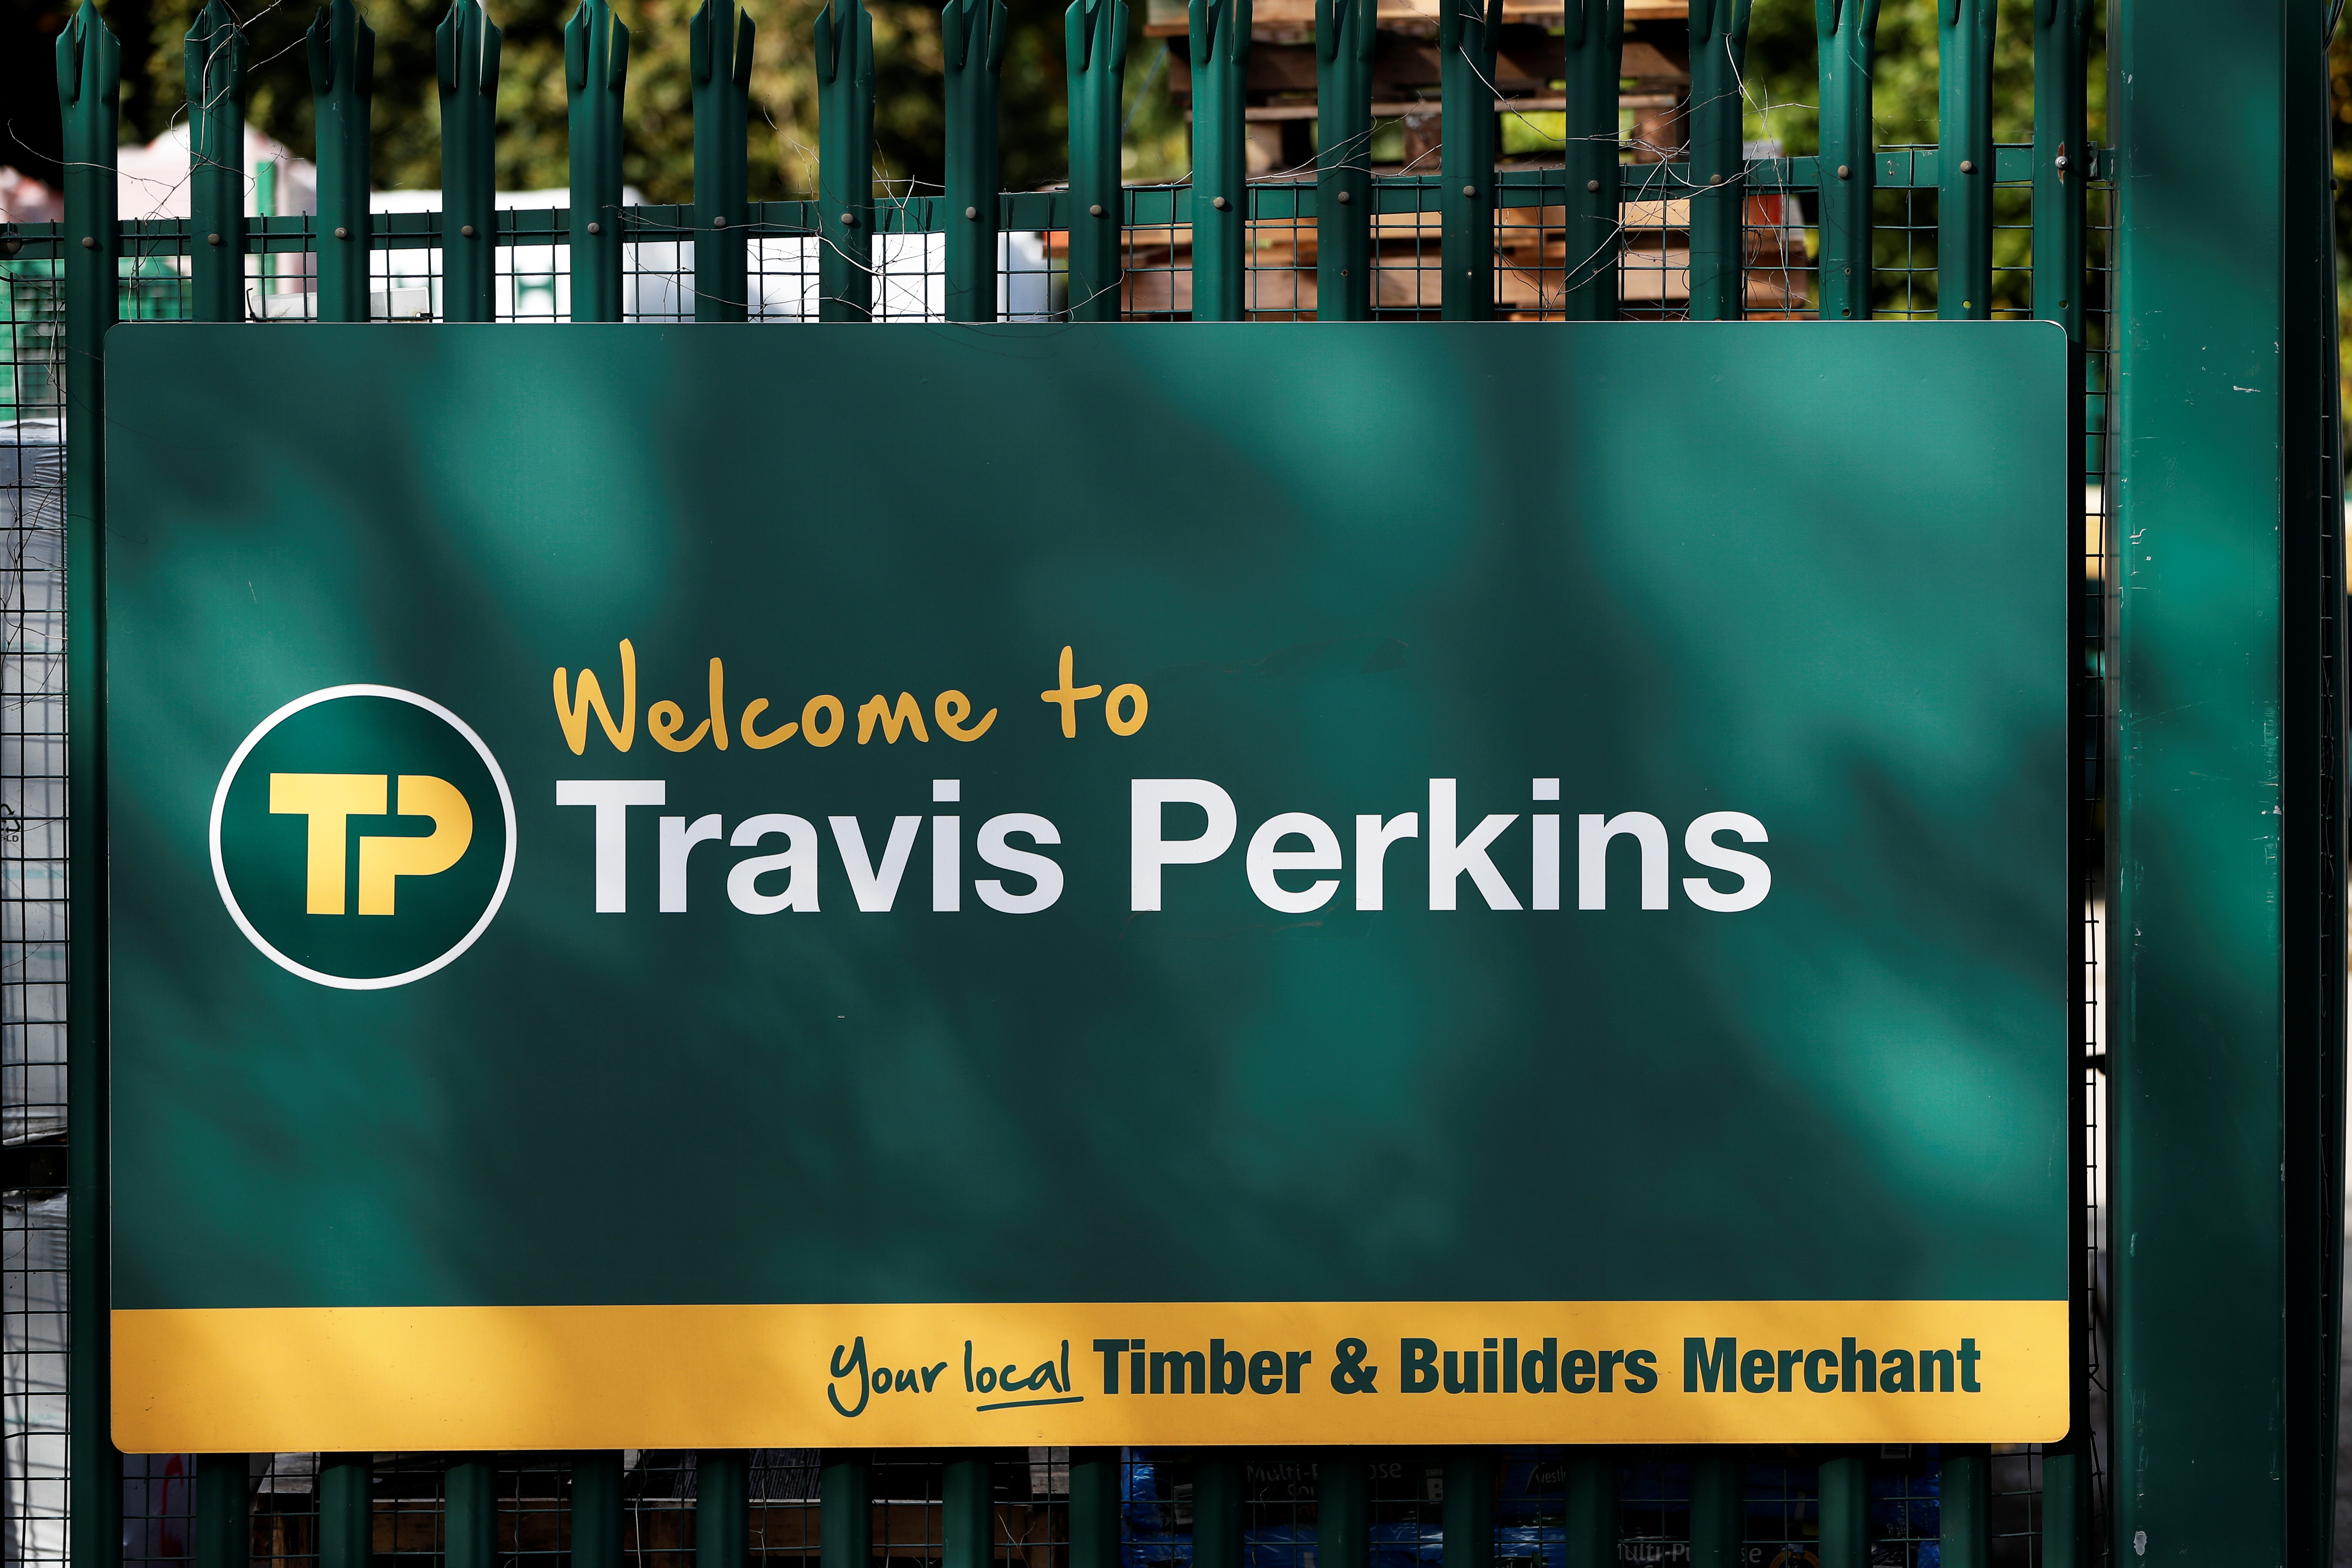 Signage is pictured at Travis Perkins, a timber and building merchants yard in St Albans